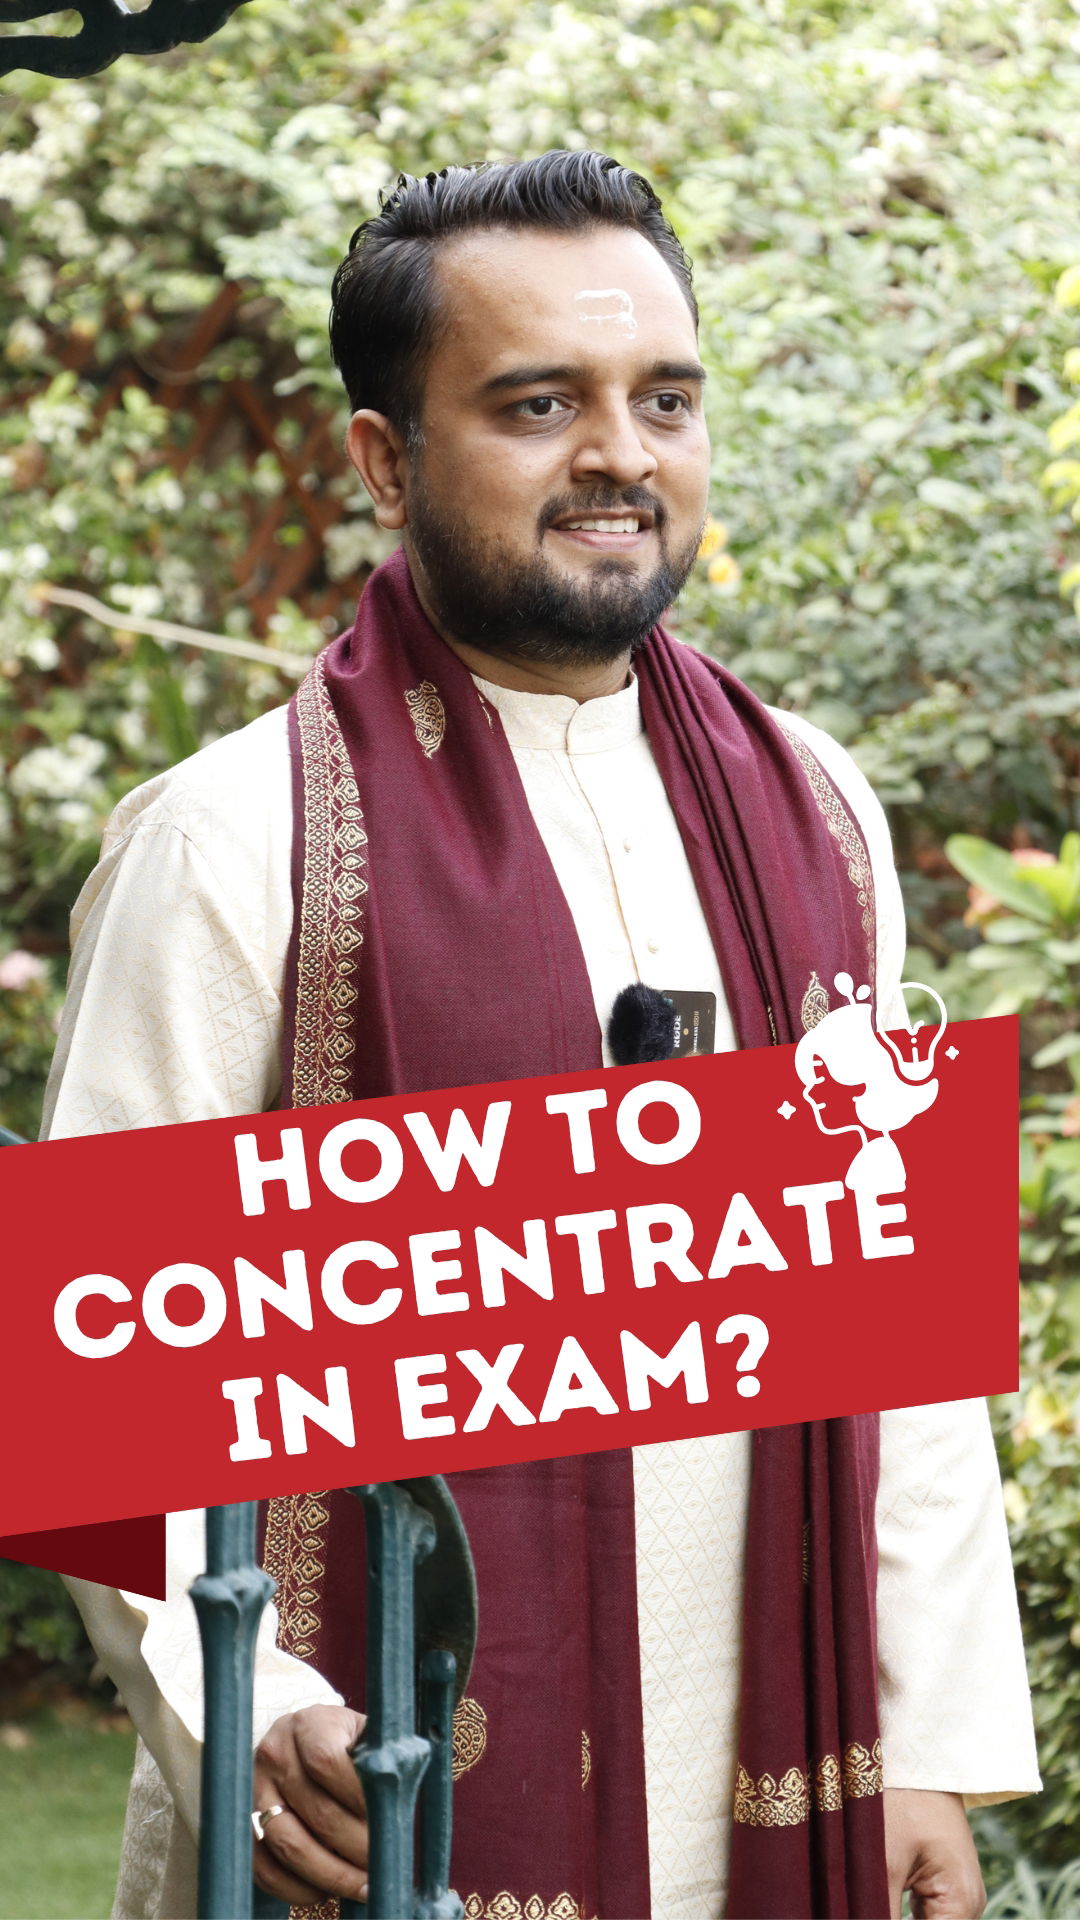 How to concentrate in exams?